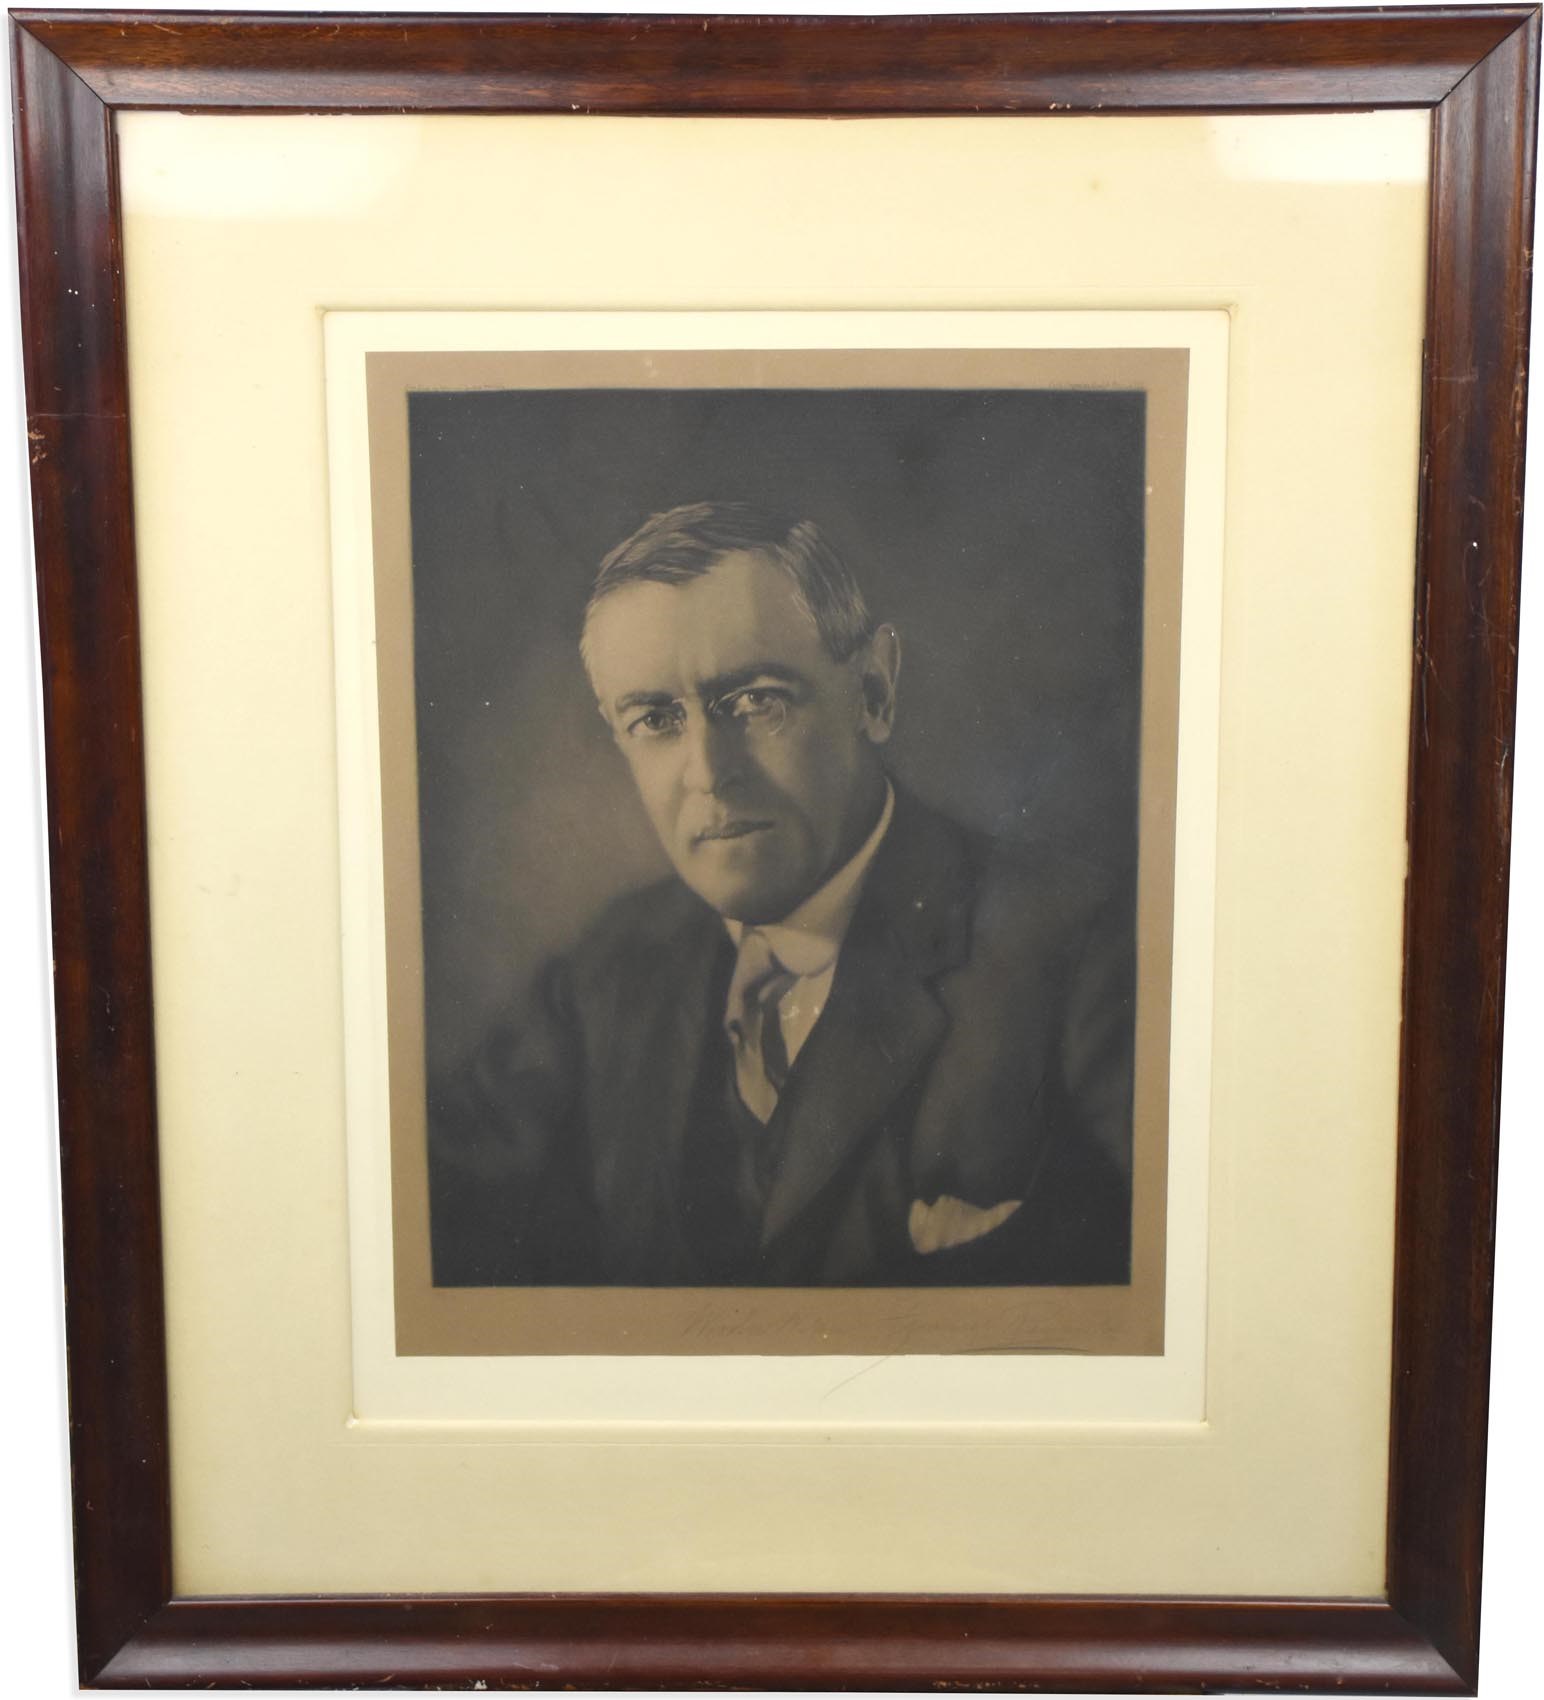 Rock And Pop Culture - 1916 Woodrow Wilson Signed Limited Edition Portrait Engraving